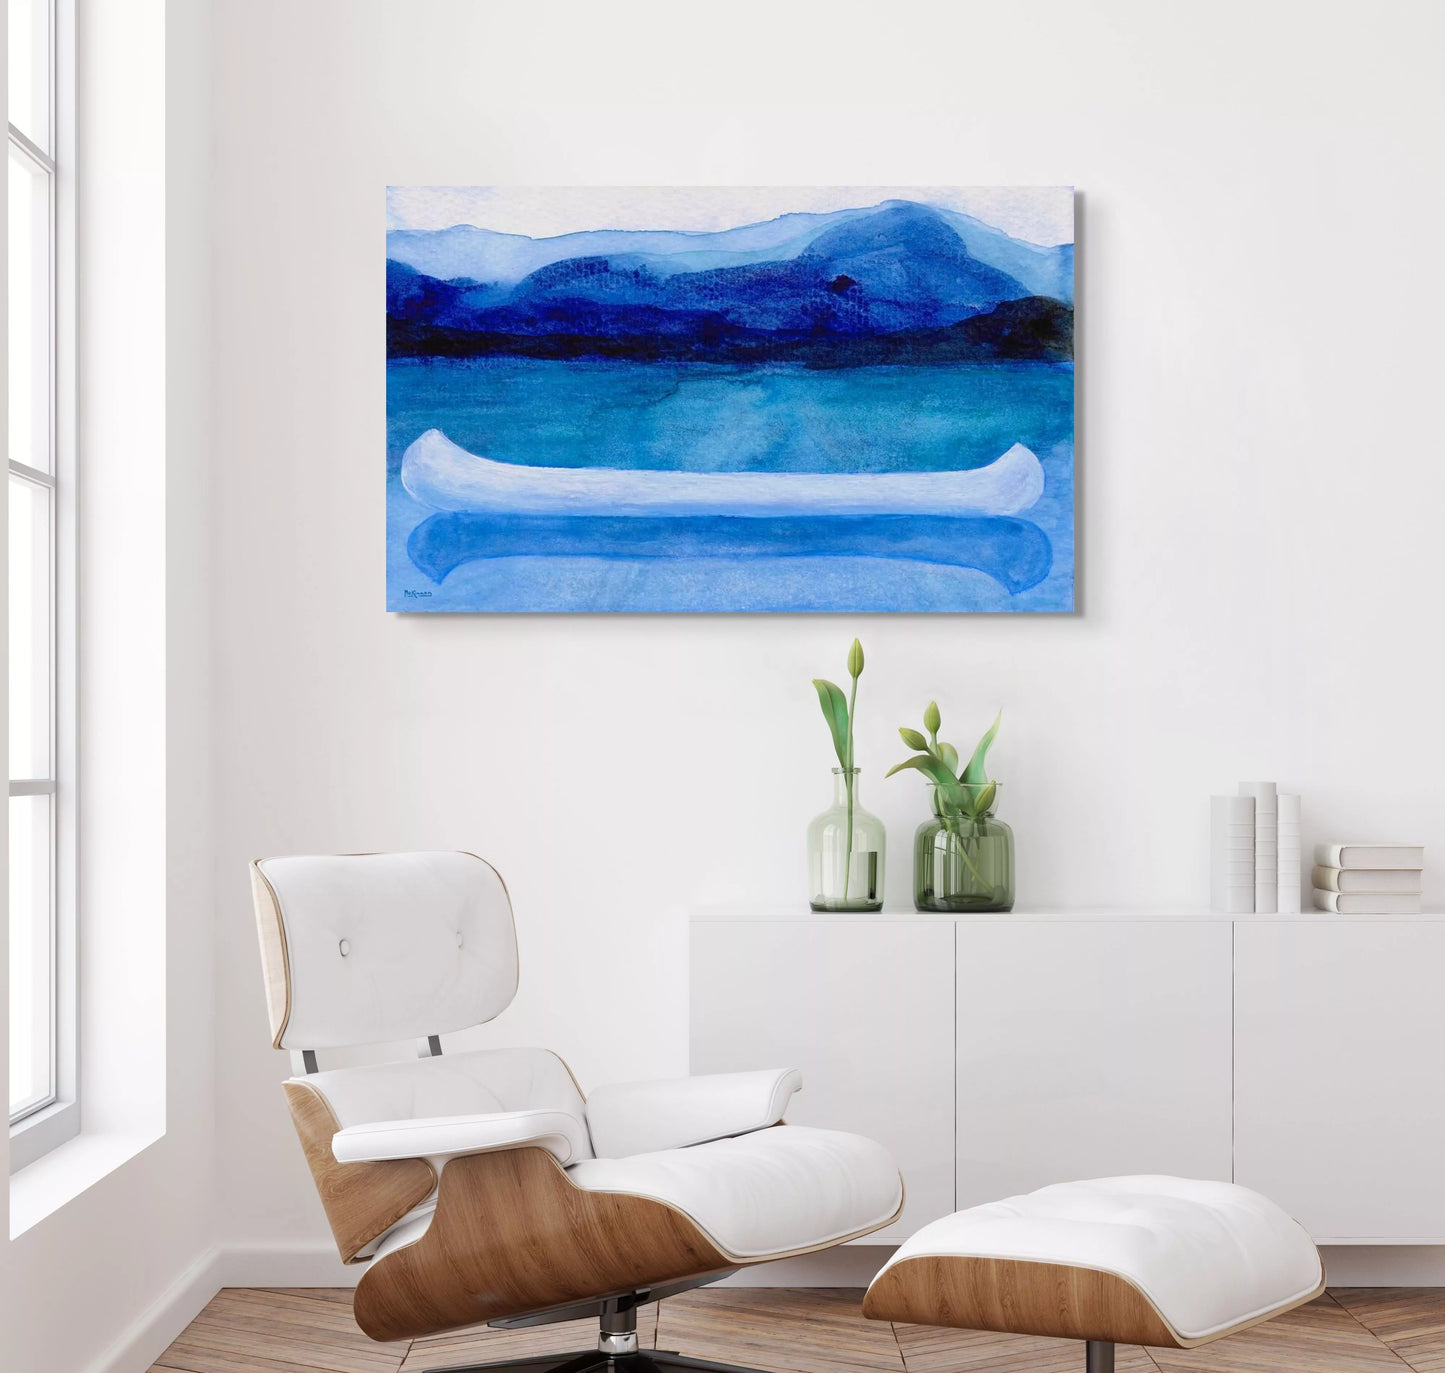 Unique Art for Lake House Decor, Original Paddling Boat Watercolor Painting, Contemporary Blue Water Canvas Print